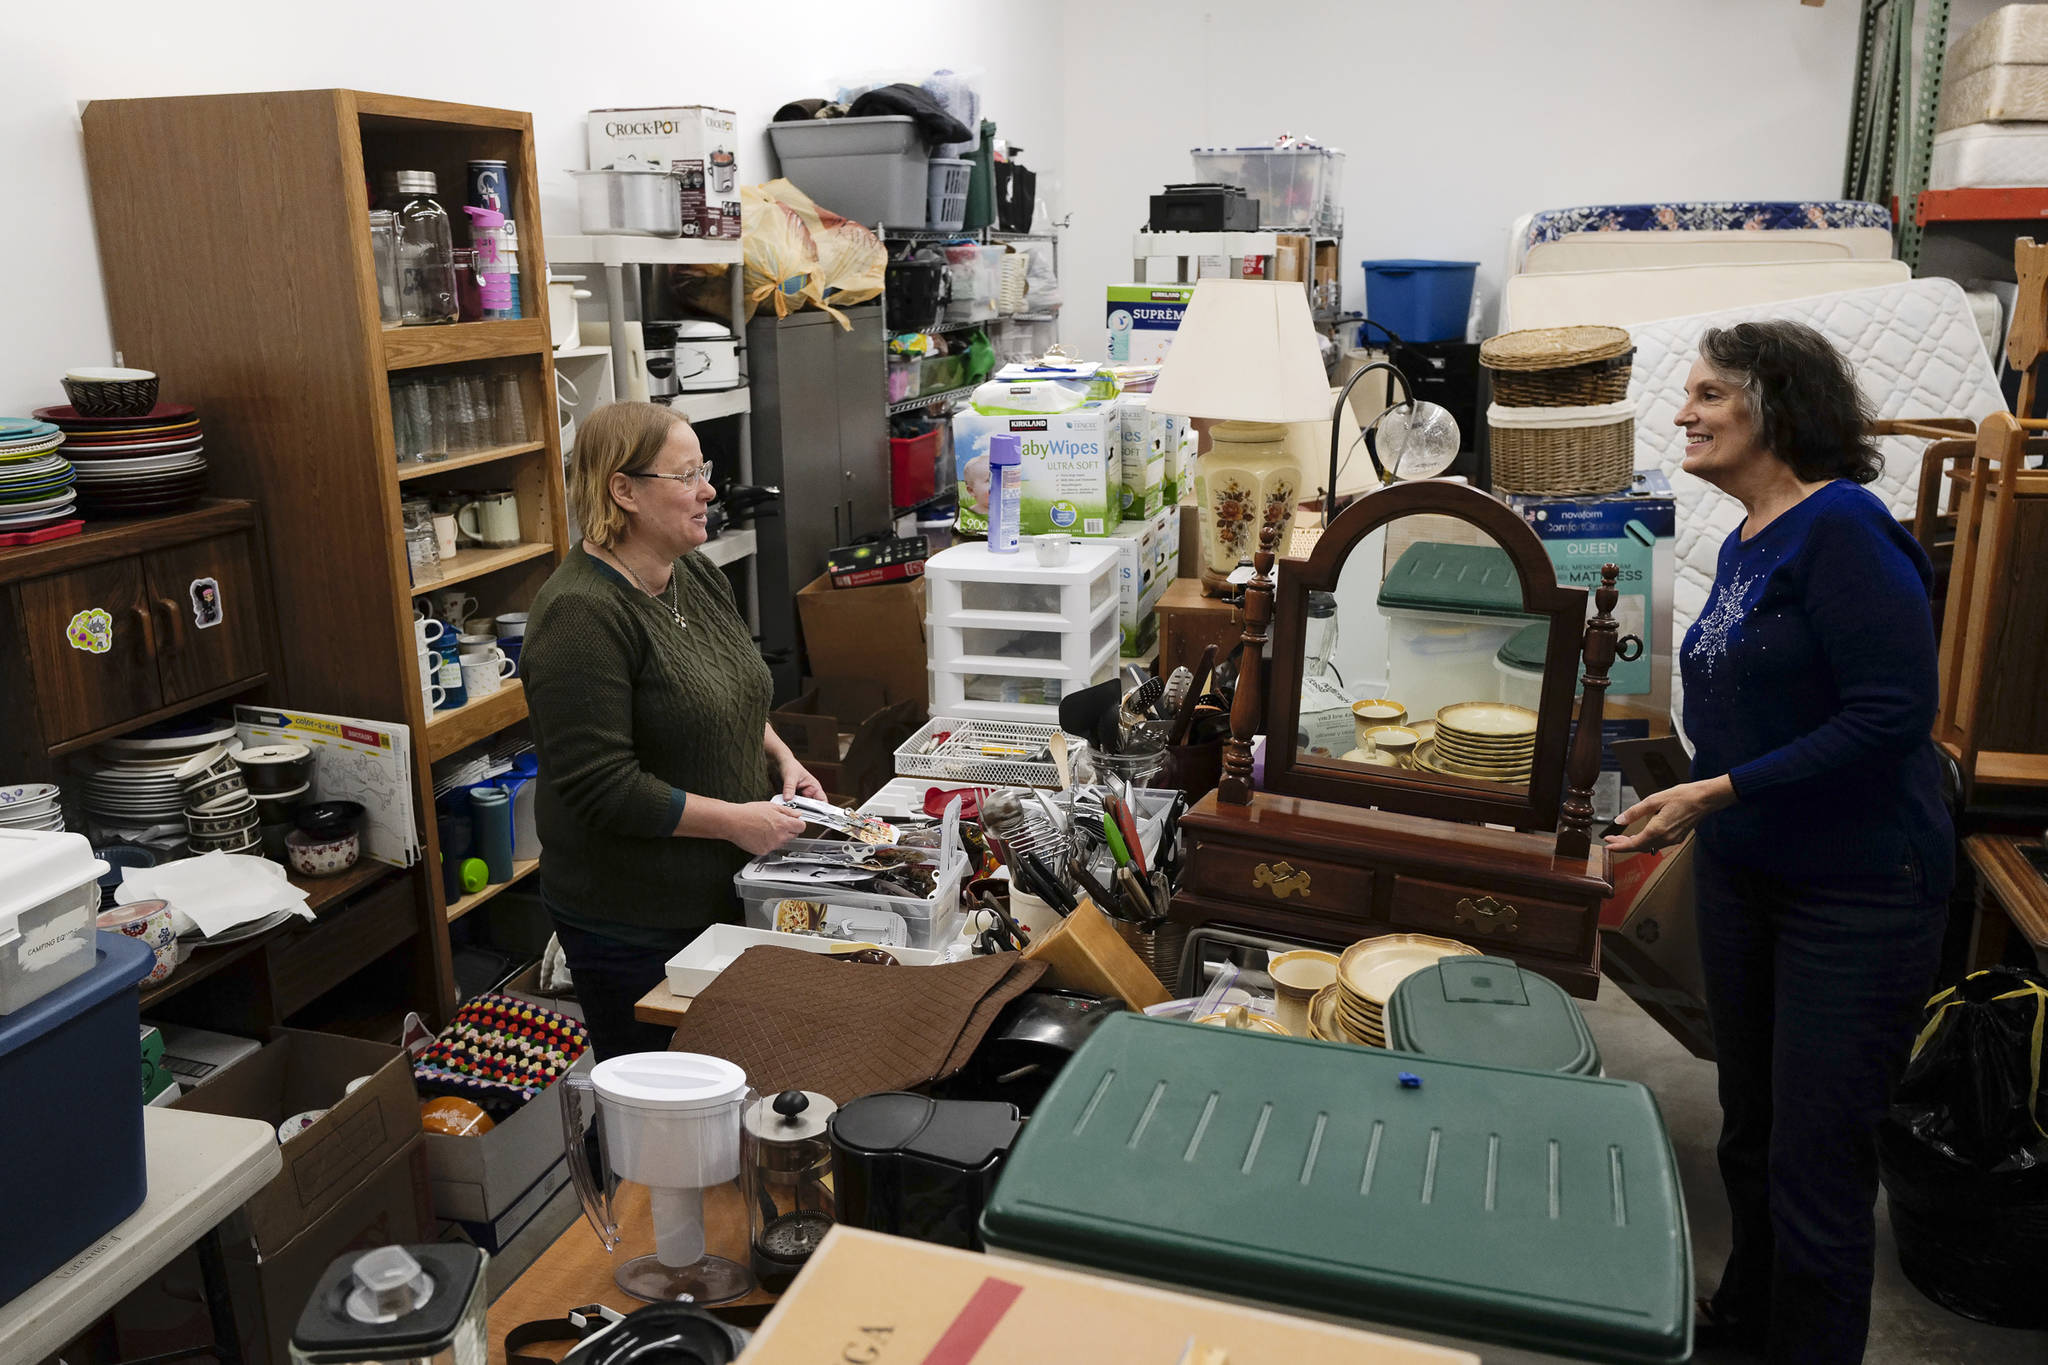 Resource Coordinator Anne Edwards, left, and Cleaning House Coordinator Karen Parker go through donated houseware items at Love, Inc. on Friday, Dec. 6, 2019. Love, Inc., works as a clearinghouse to receive requests for assistance and eliminate duplicated services between churches and community agencies. (Michael Penn | Juneau Empire)